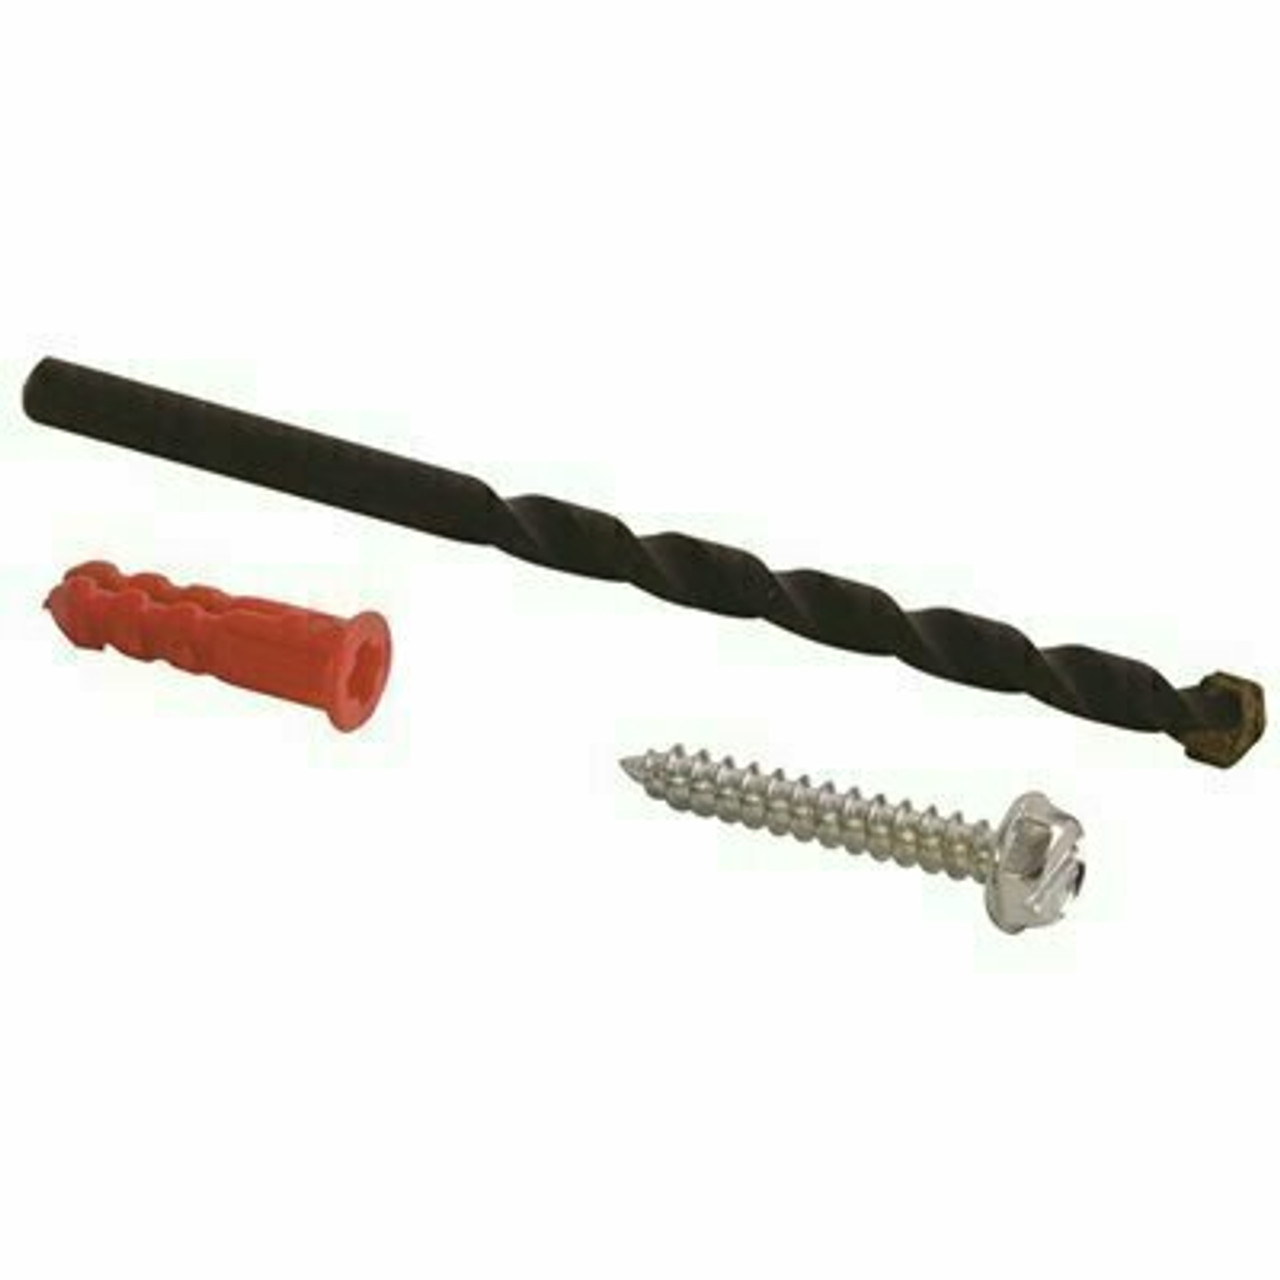 Diversitech 1/4 In. X 1 In. Wall Anchors Kit With #10 X 1-1/4 In. Hex Screws (50 Per Case)